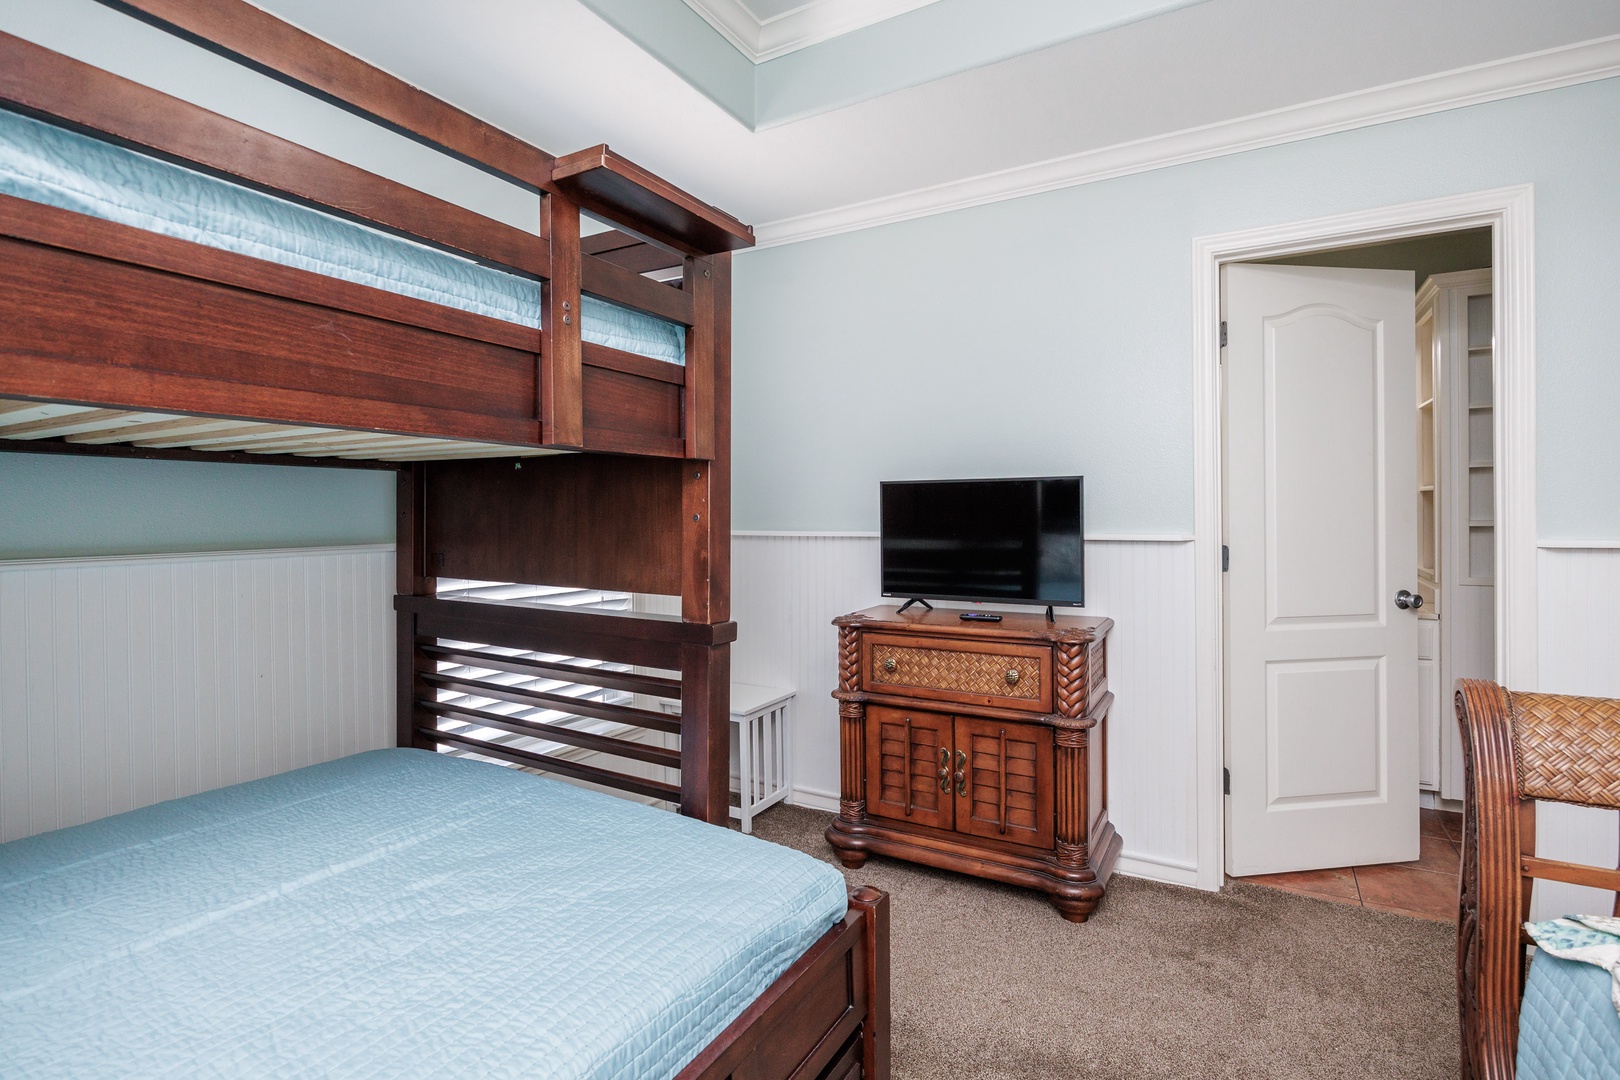 Bedroom 3 with queen bed, twin/full bunk bed, tv, and ensuite